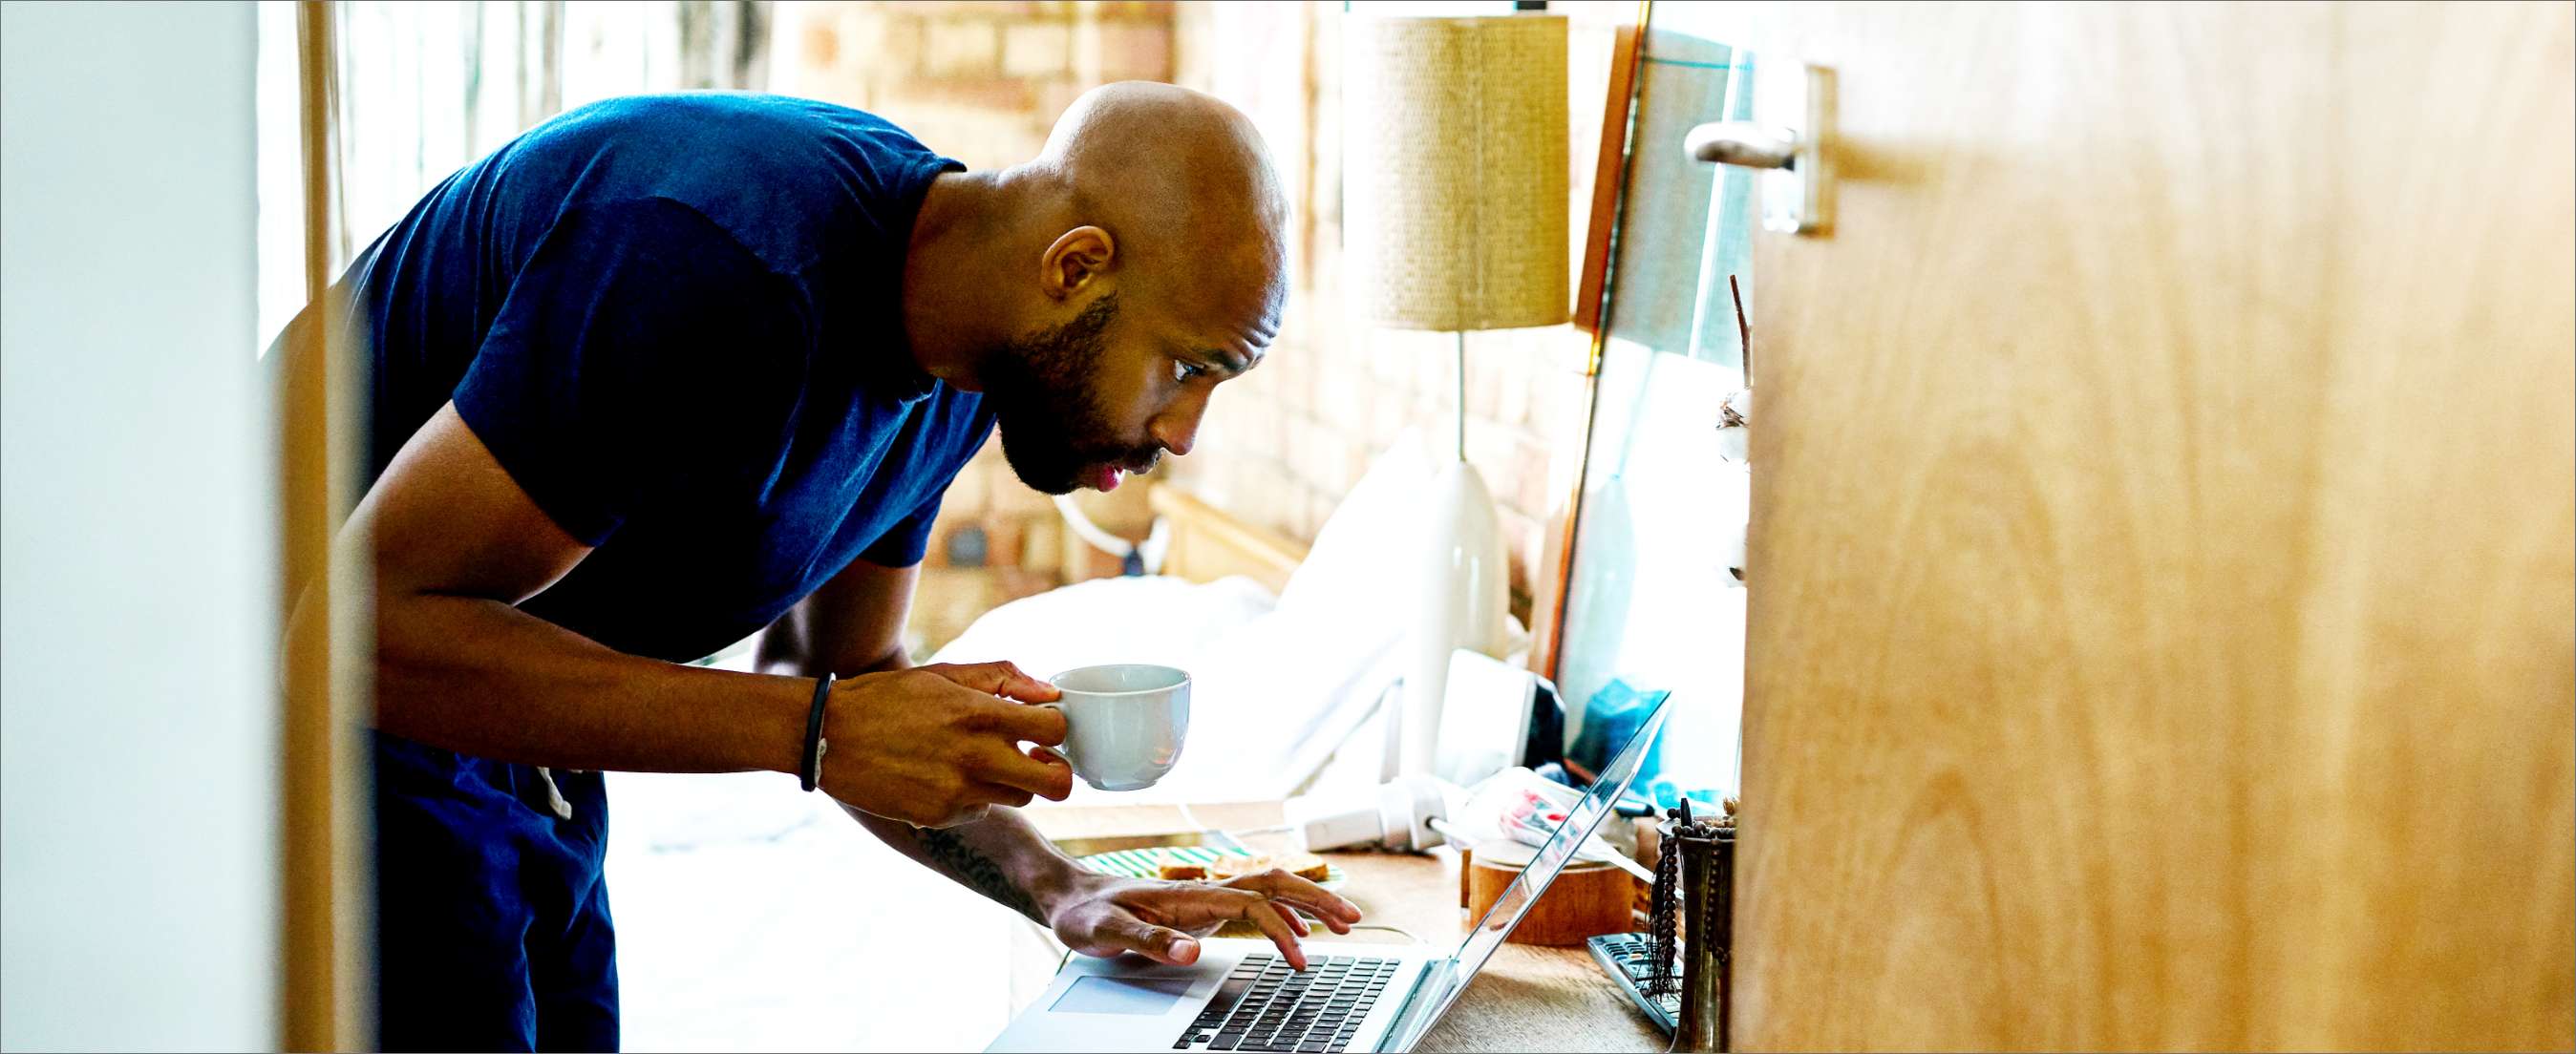 Mid adult black man using computer on dressing table in bedroom, holding mug, having breakfast whilst getting ready.